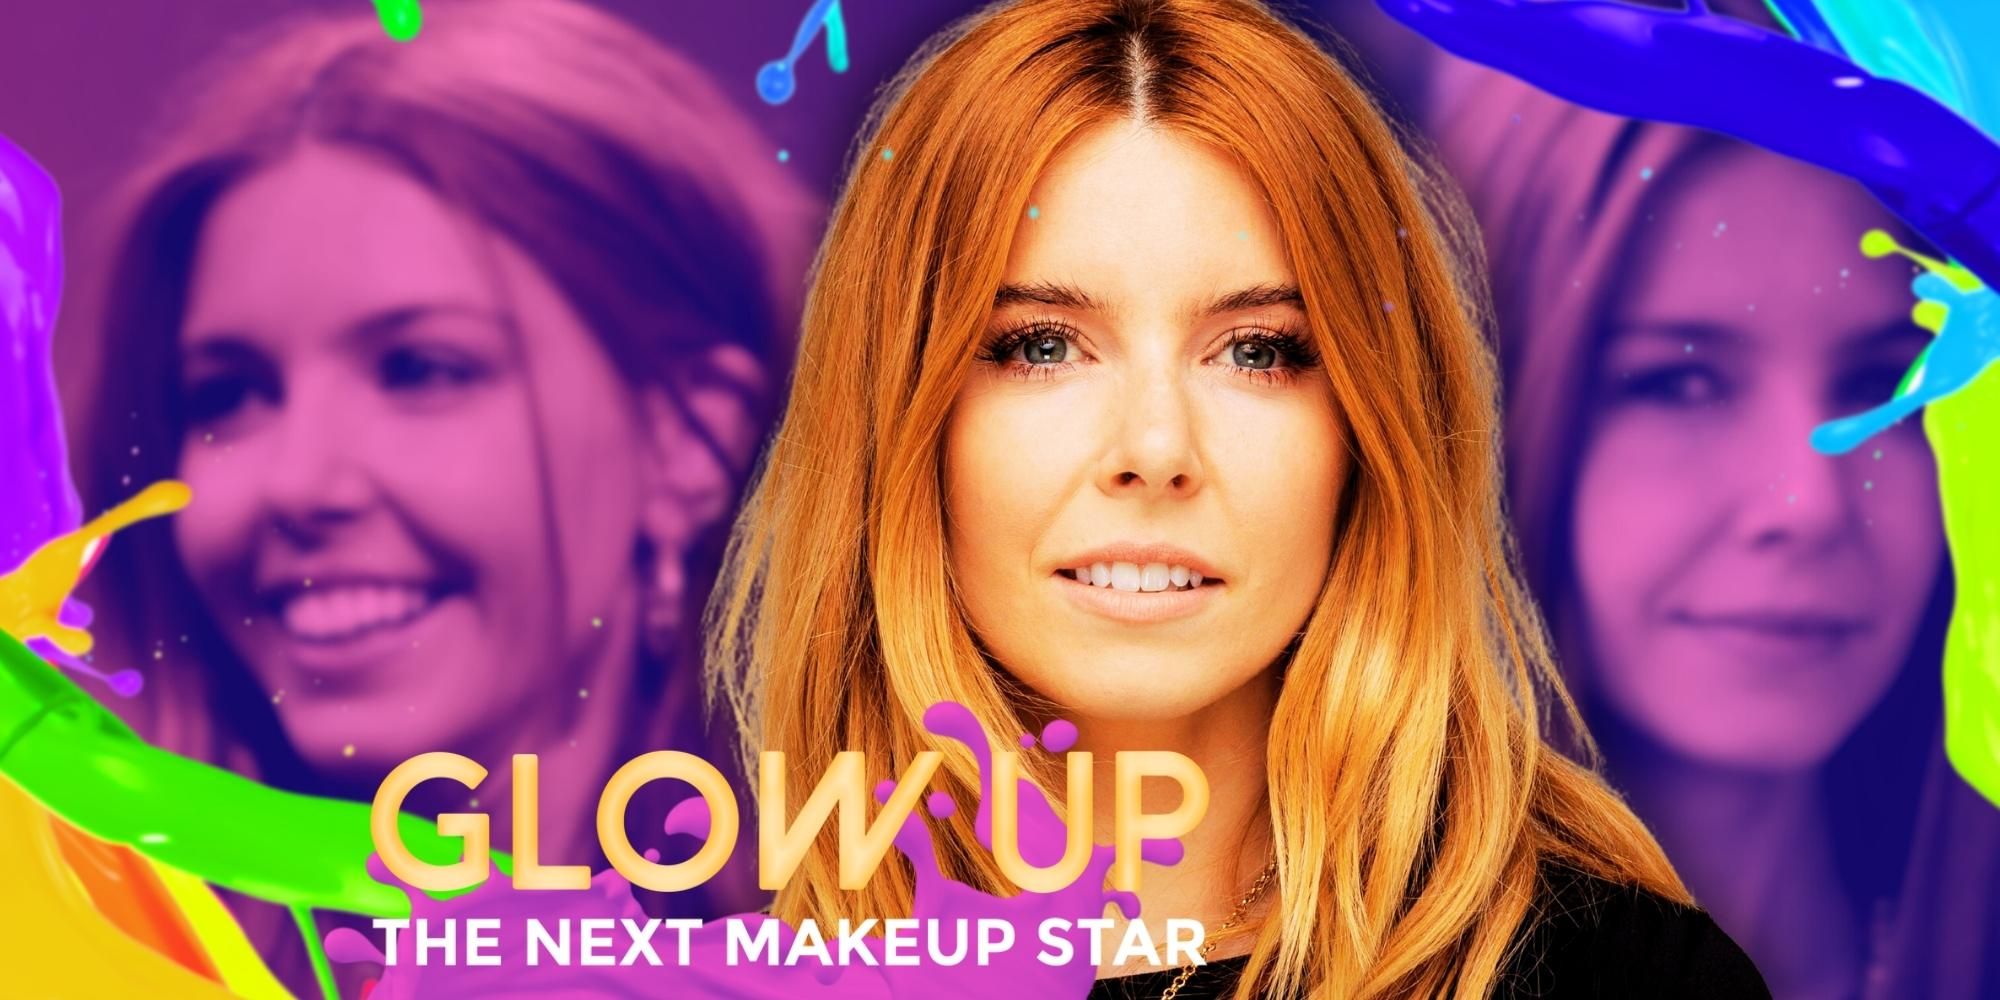 Glow Up: Why Stacey Dooley Is No Longer Hosting The Show